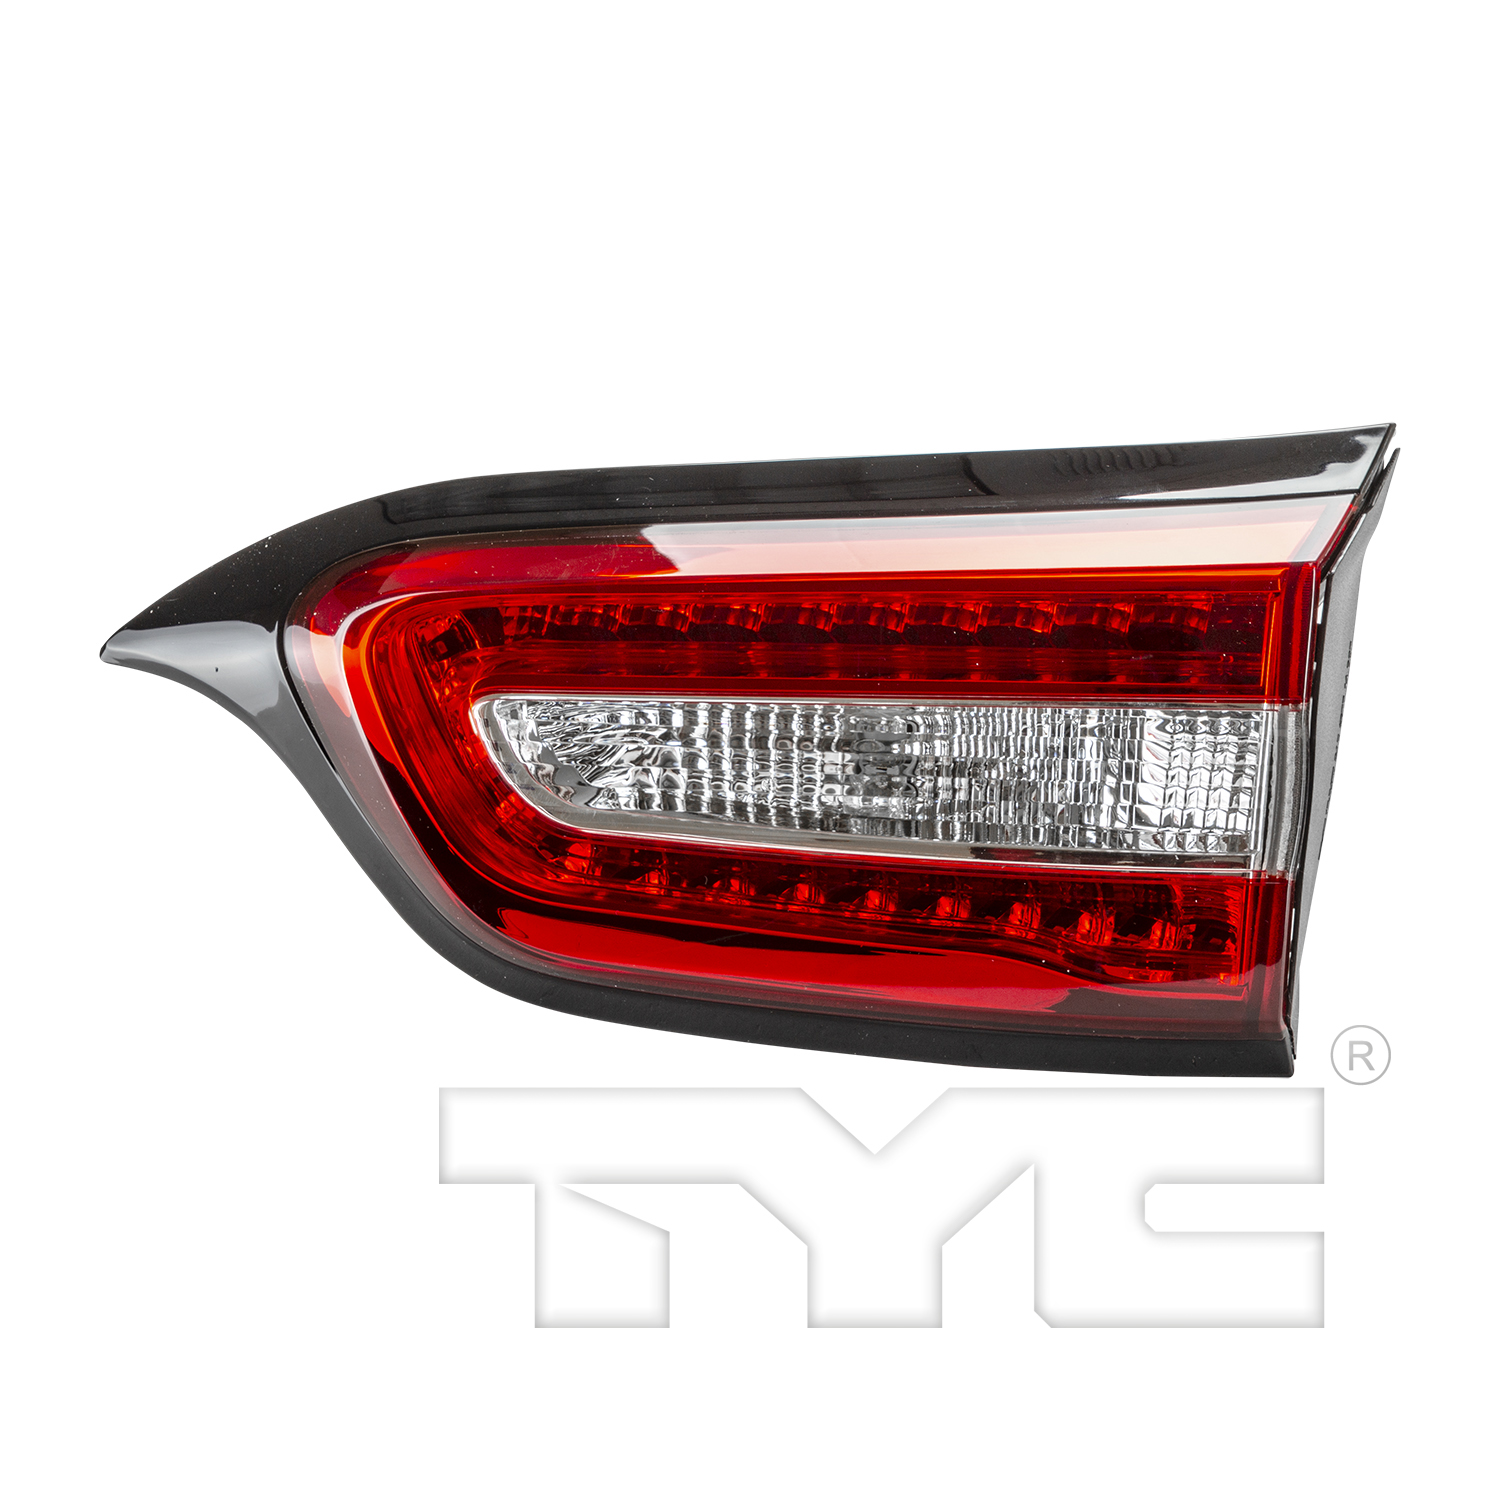 Aftermarket TAILLIGHTS for JEEP - CHEROKEE, CHEROKEE,14-18,RT Taillamp assy inner